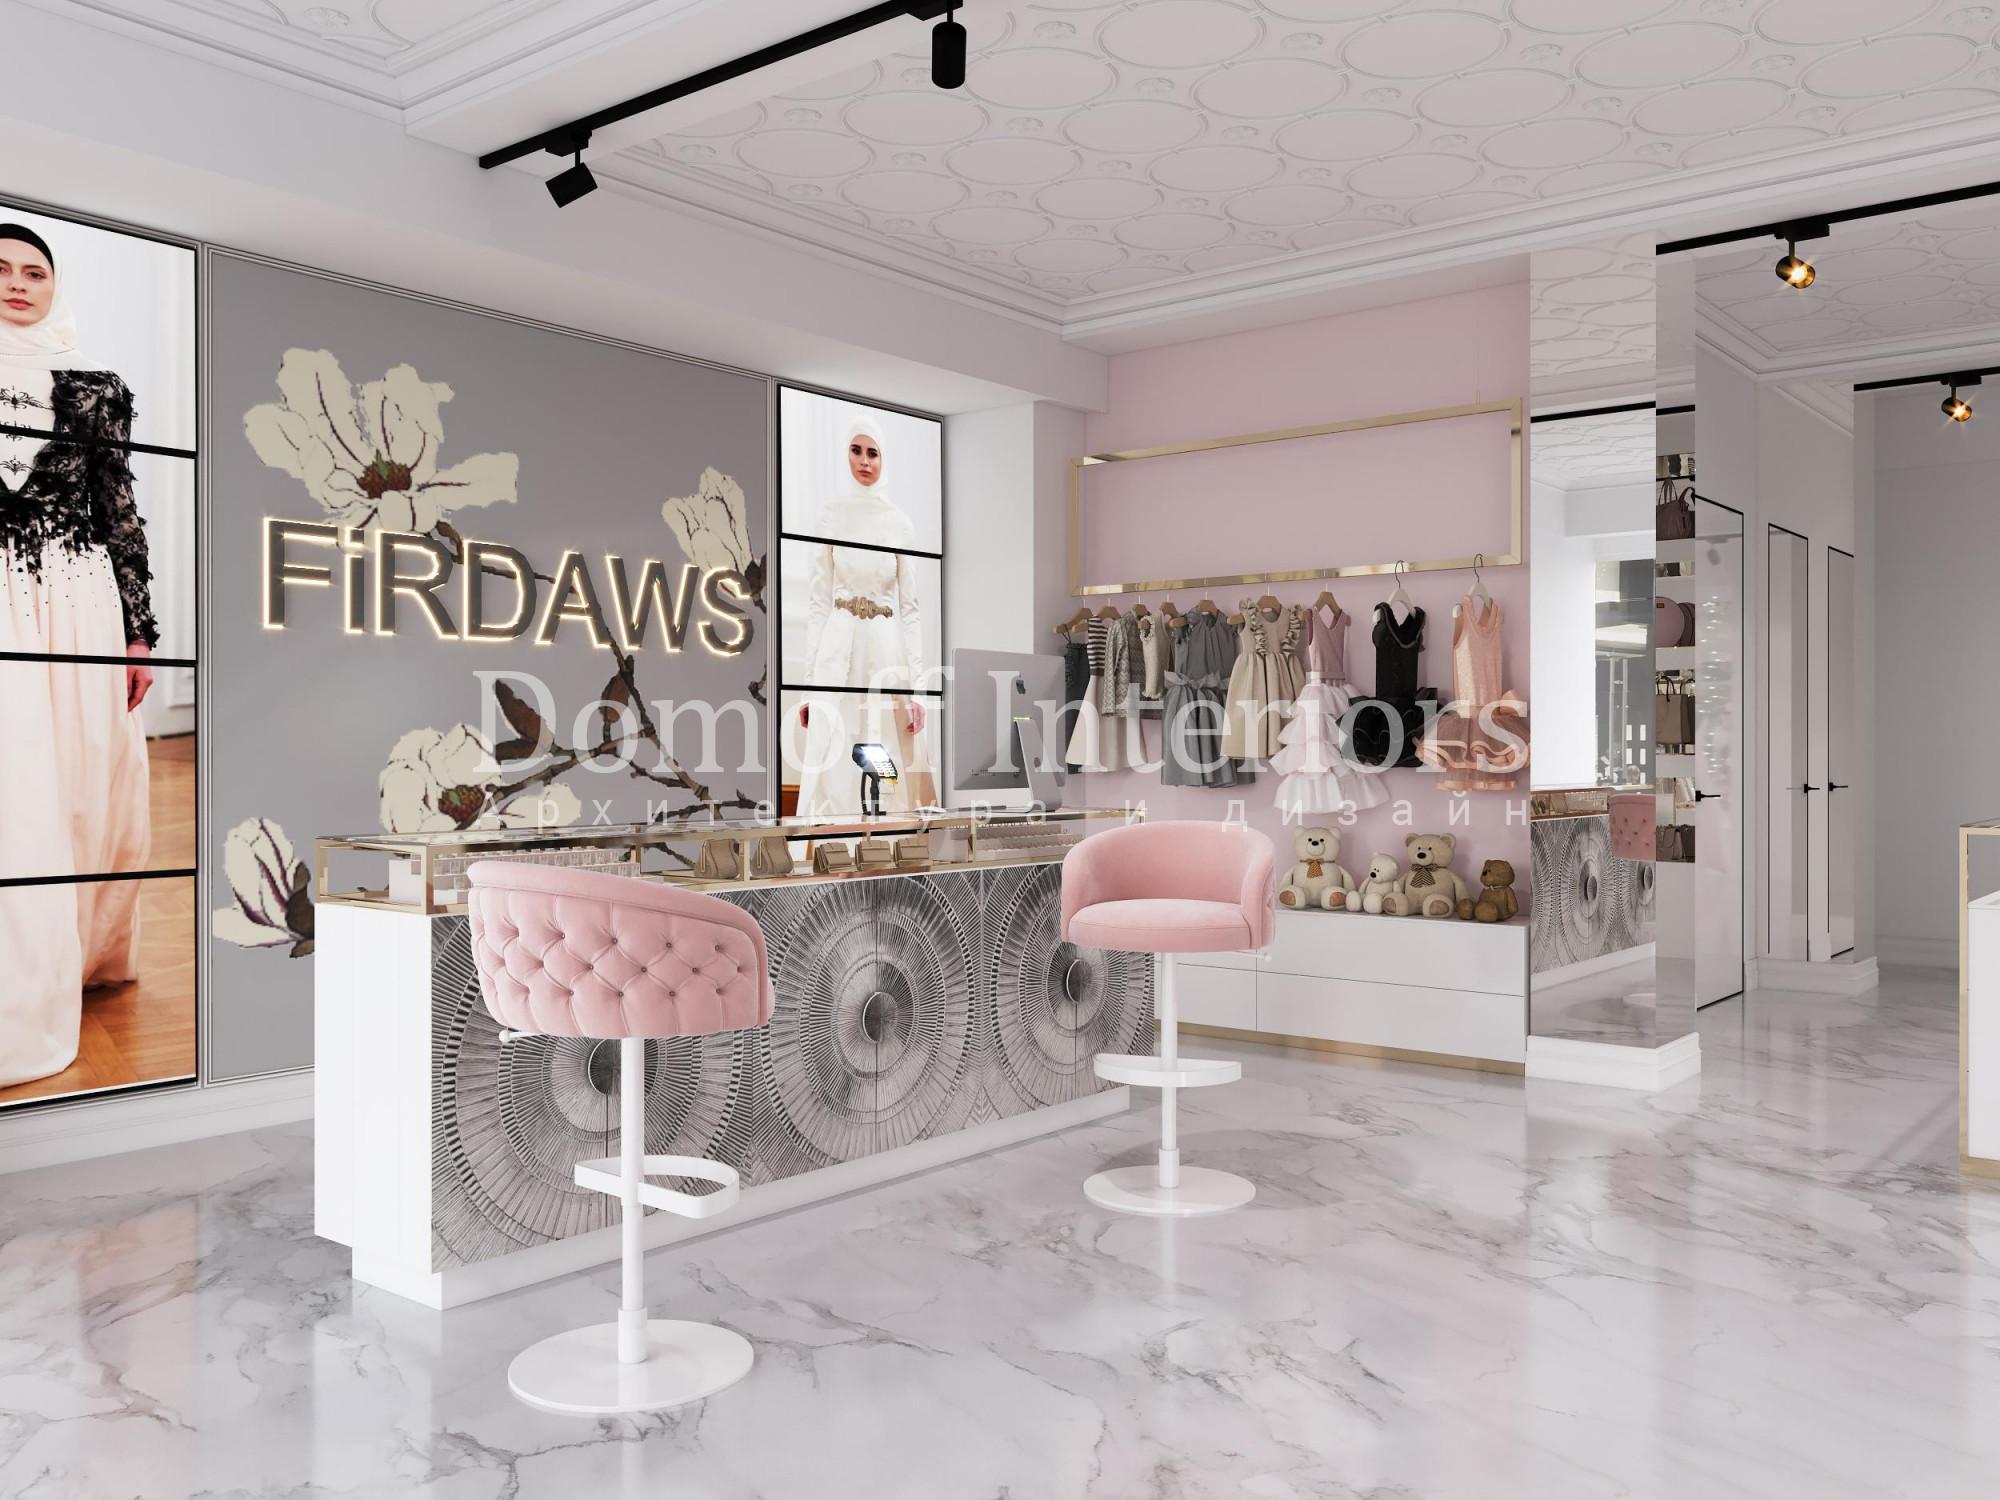 Interior design project of a commercial property “Women's Clothing Boutique”, Modern / Contemporary style